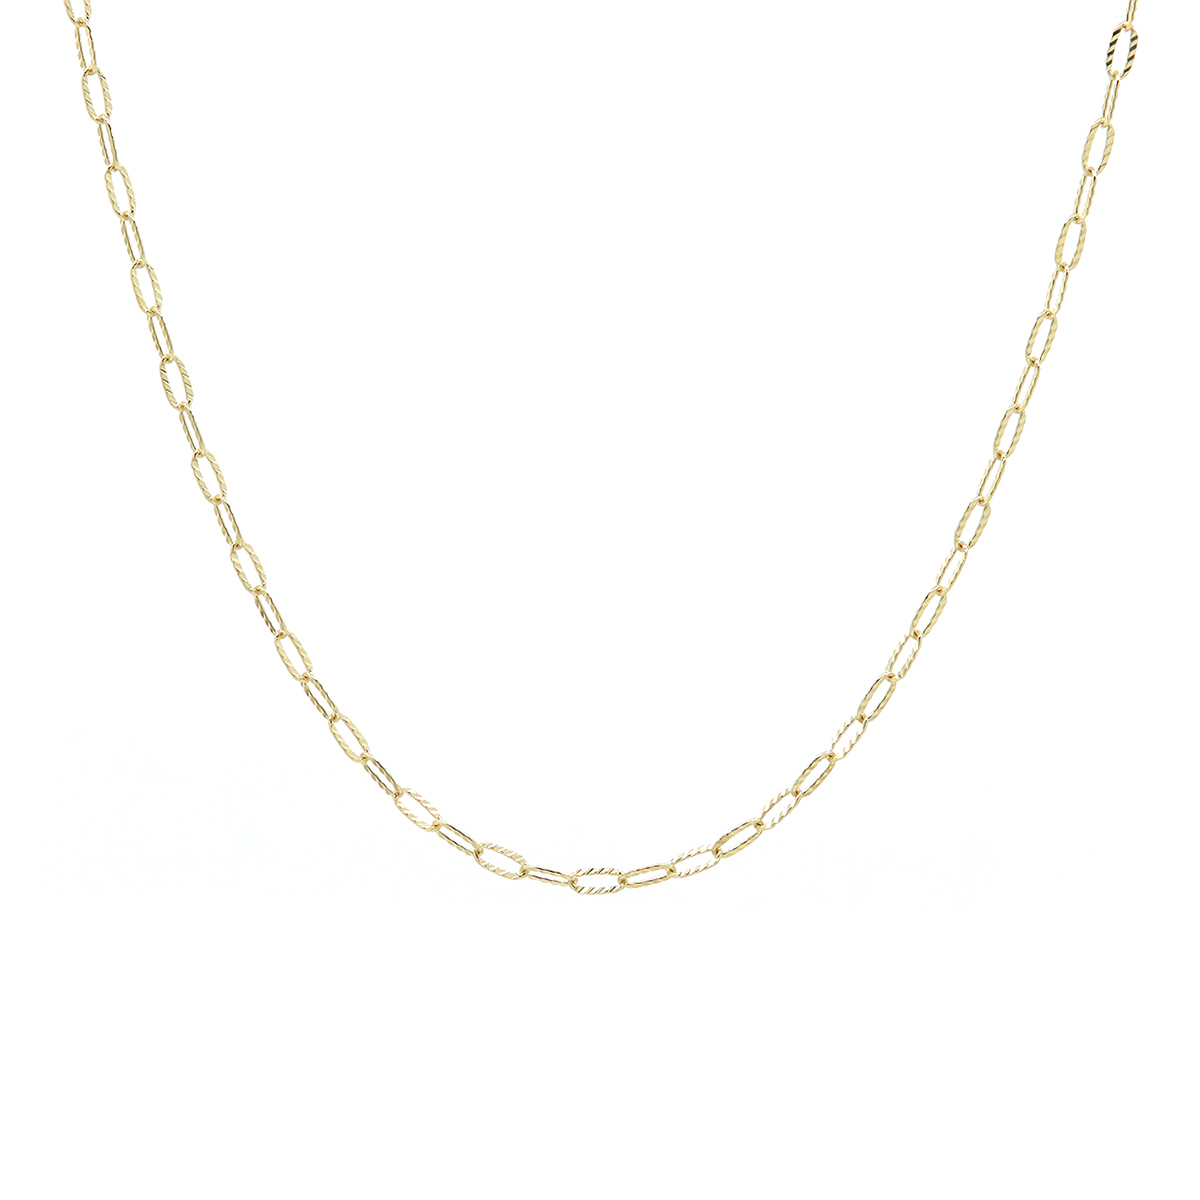 Gold Plated Sterling Silver Textured Oval Link Chain